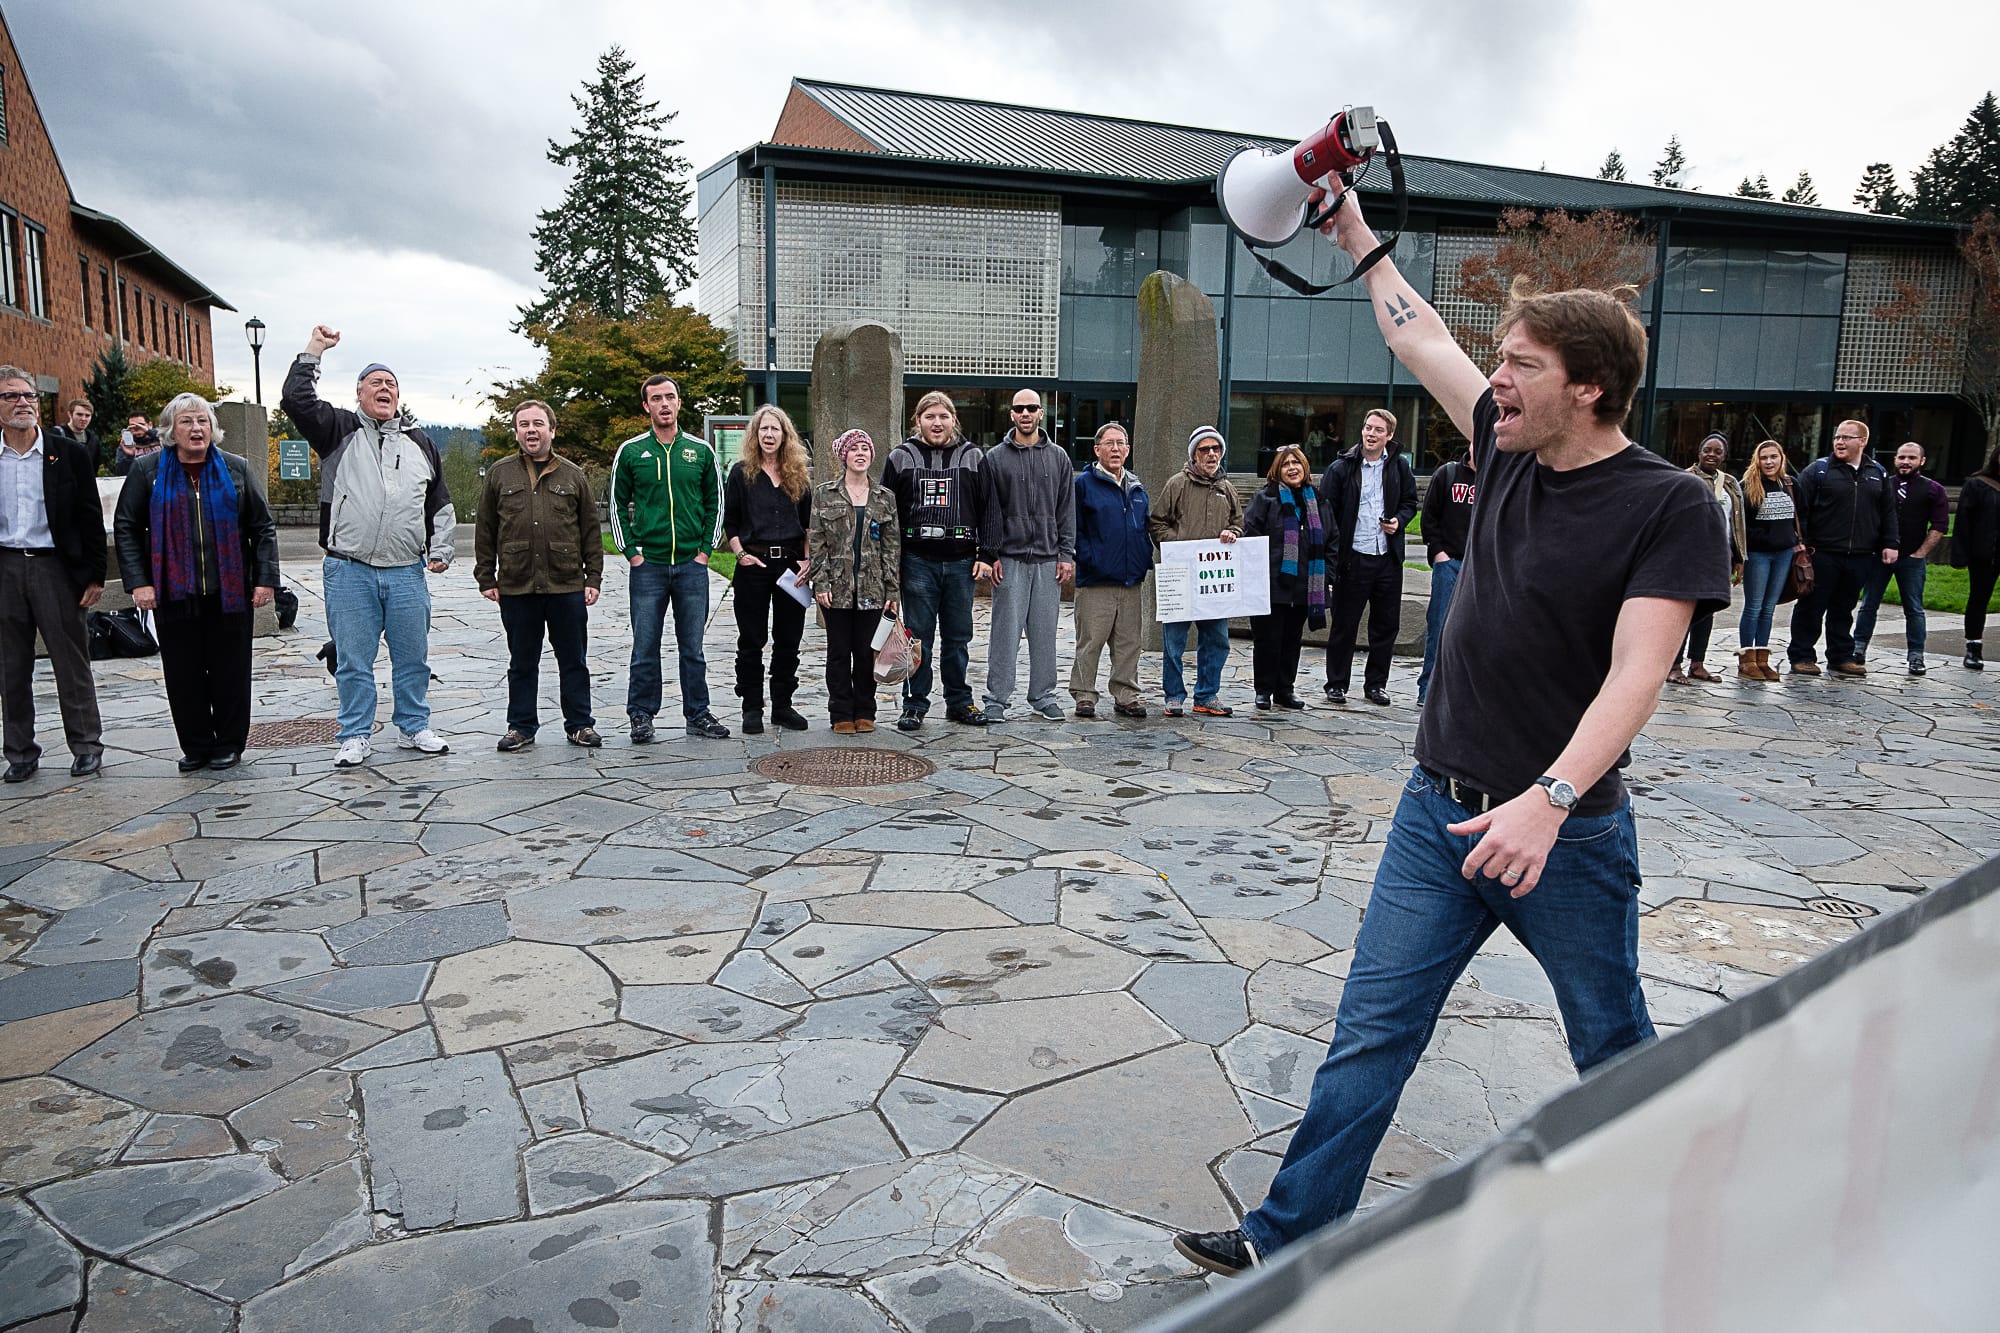 Graduate student Scott Calvert leads a unity rally at the WSU Vancouver campus Thursday.